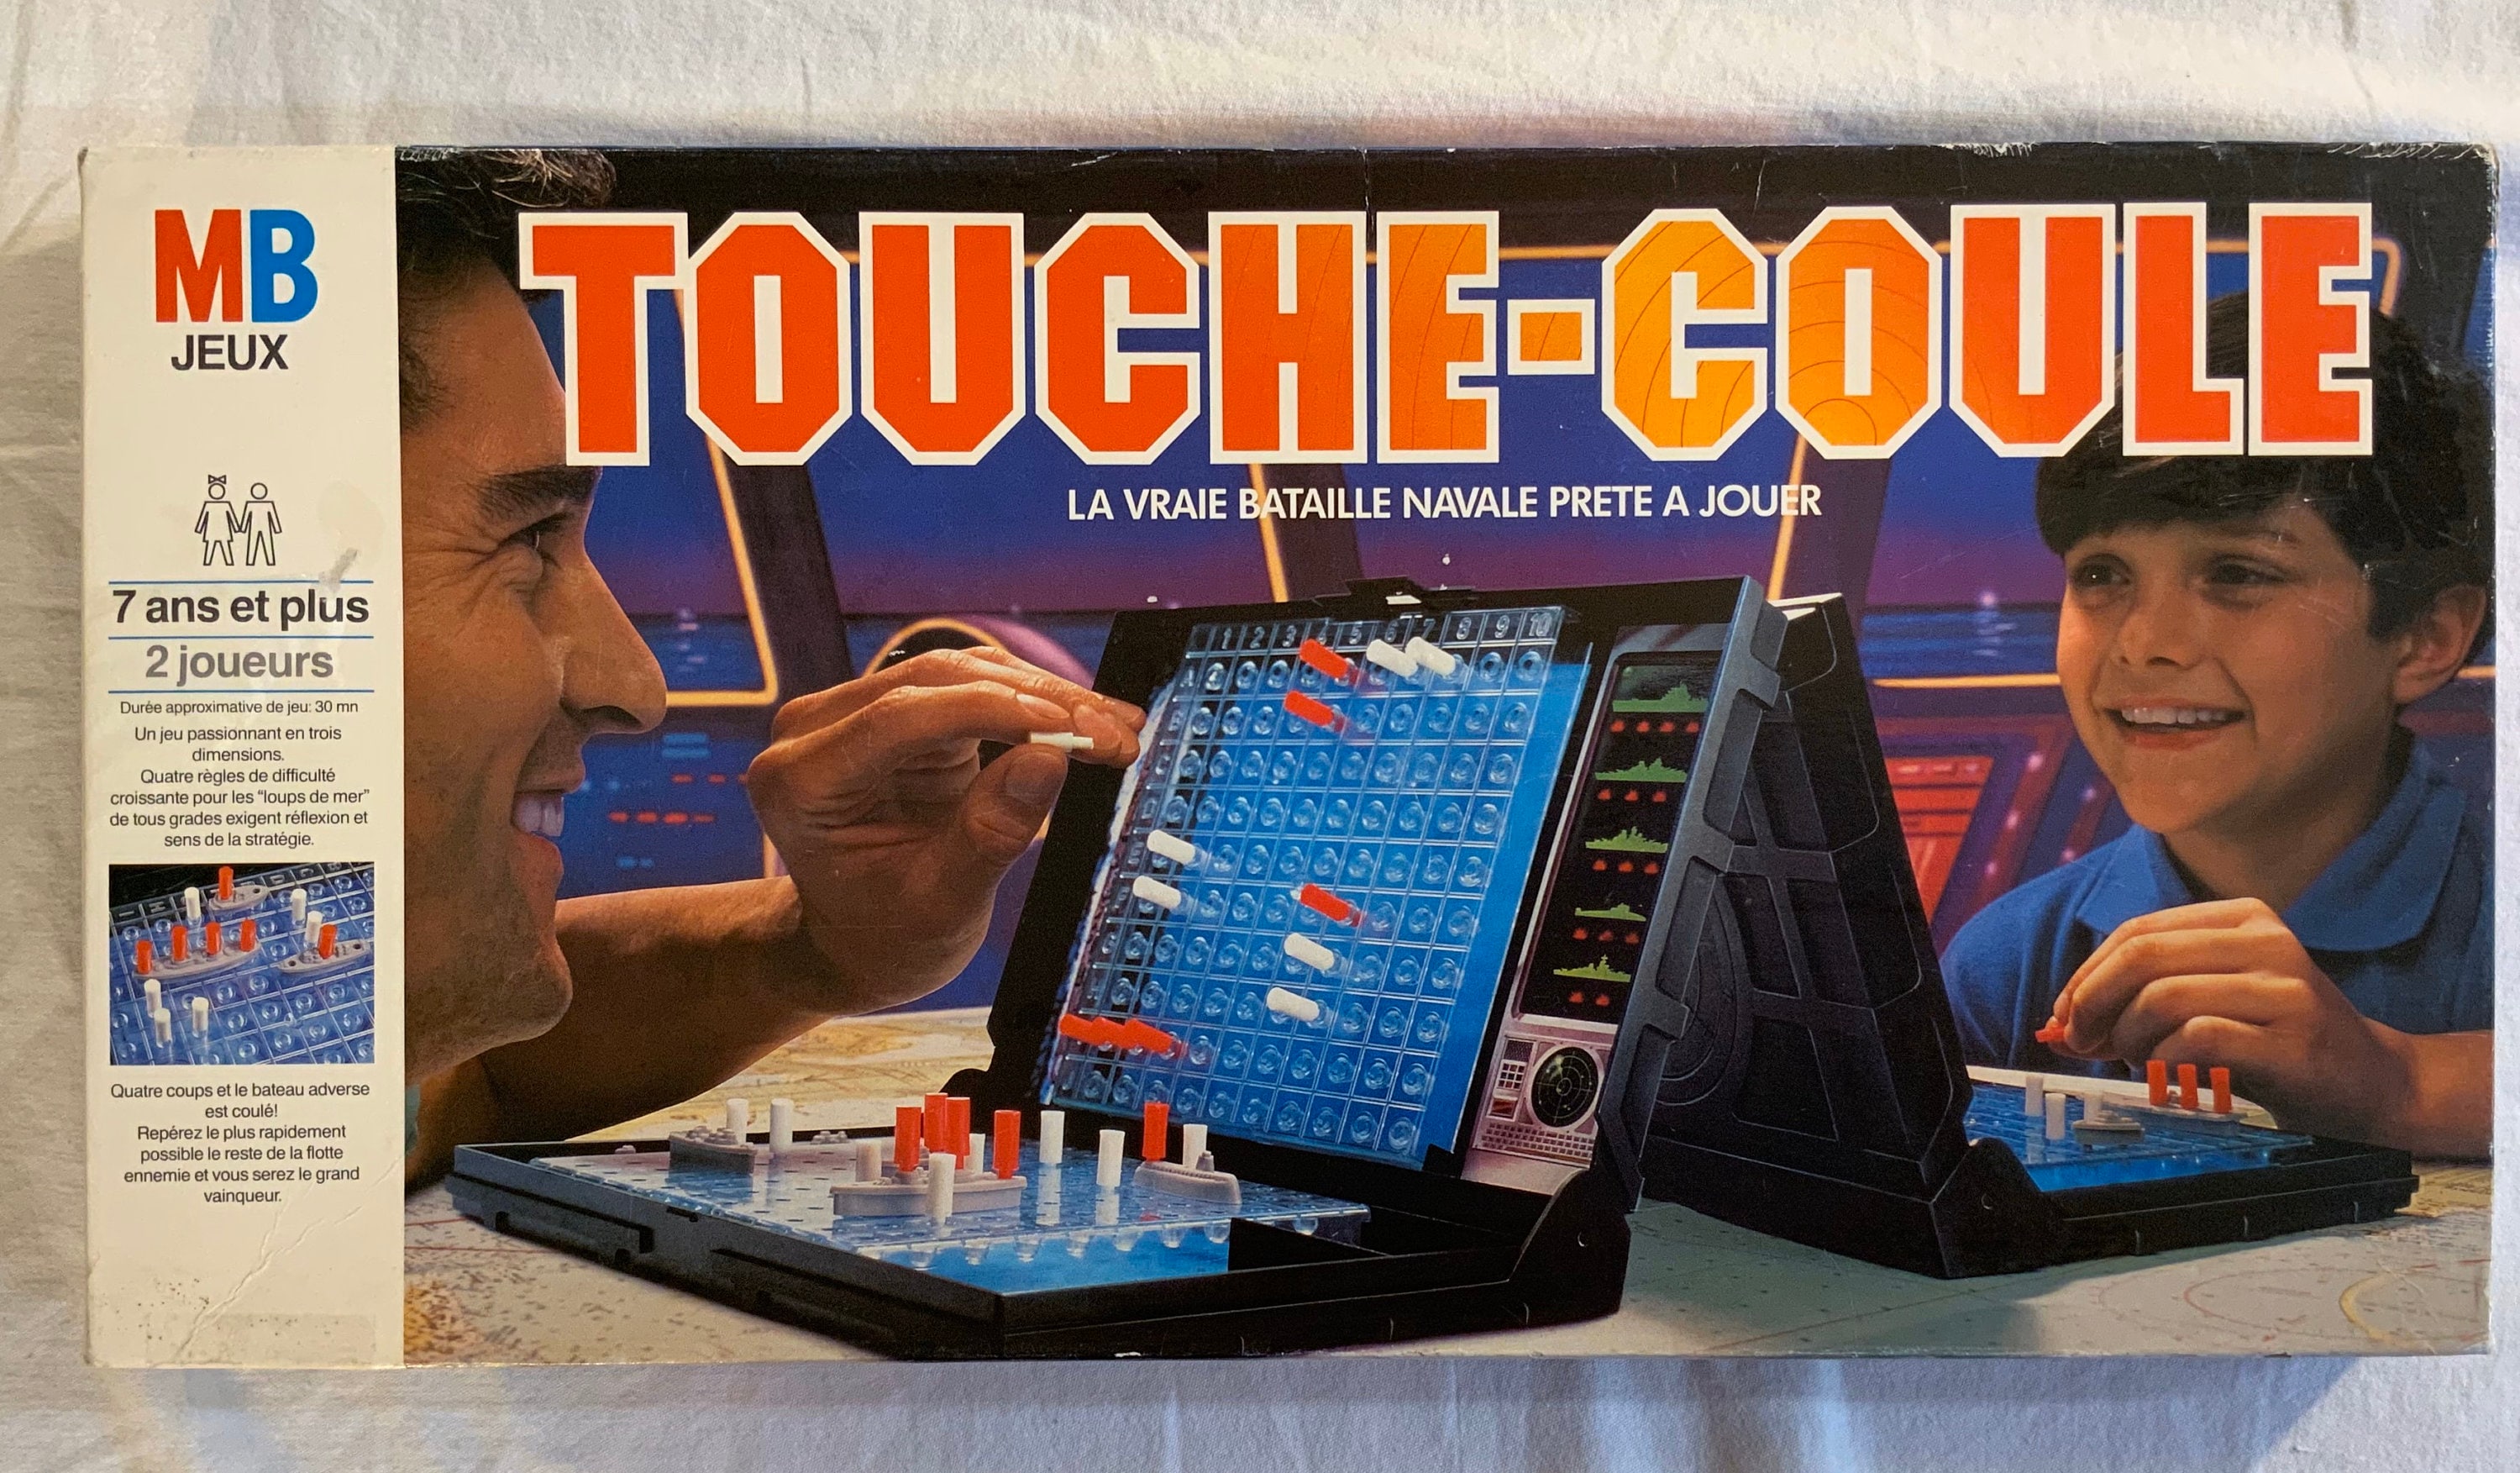 Touché-coule French Battleship Vintage Game 1988 